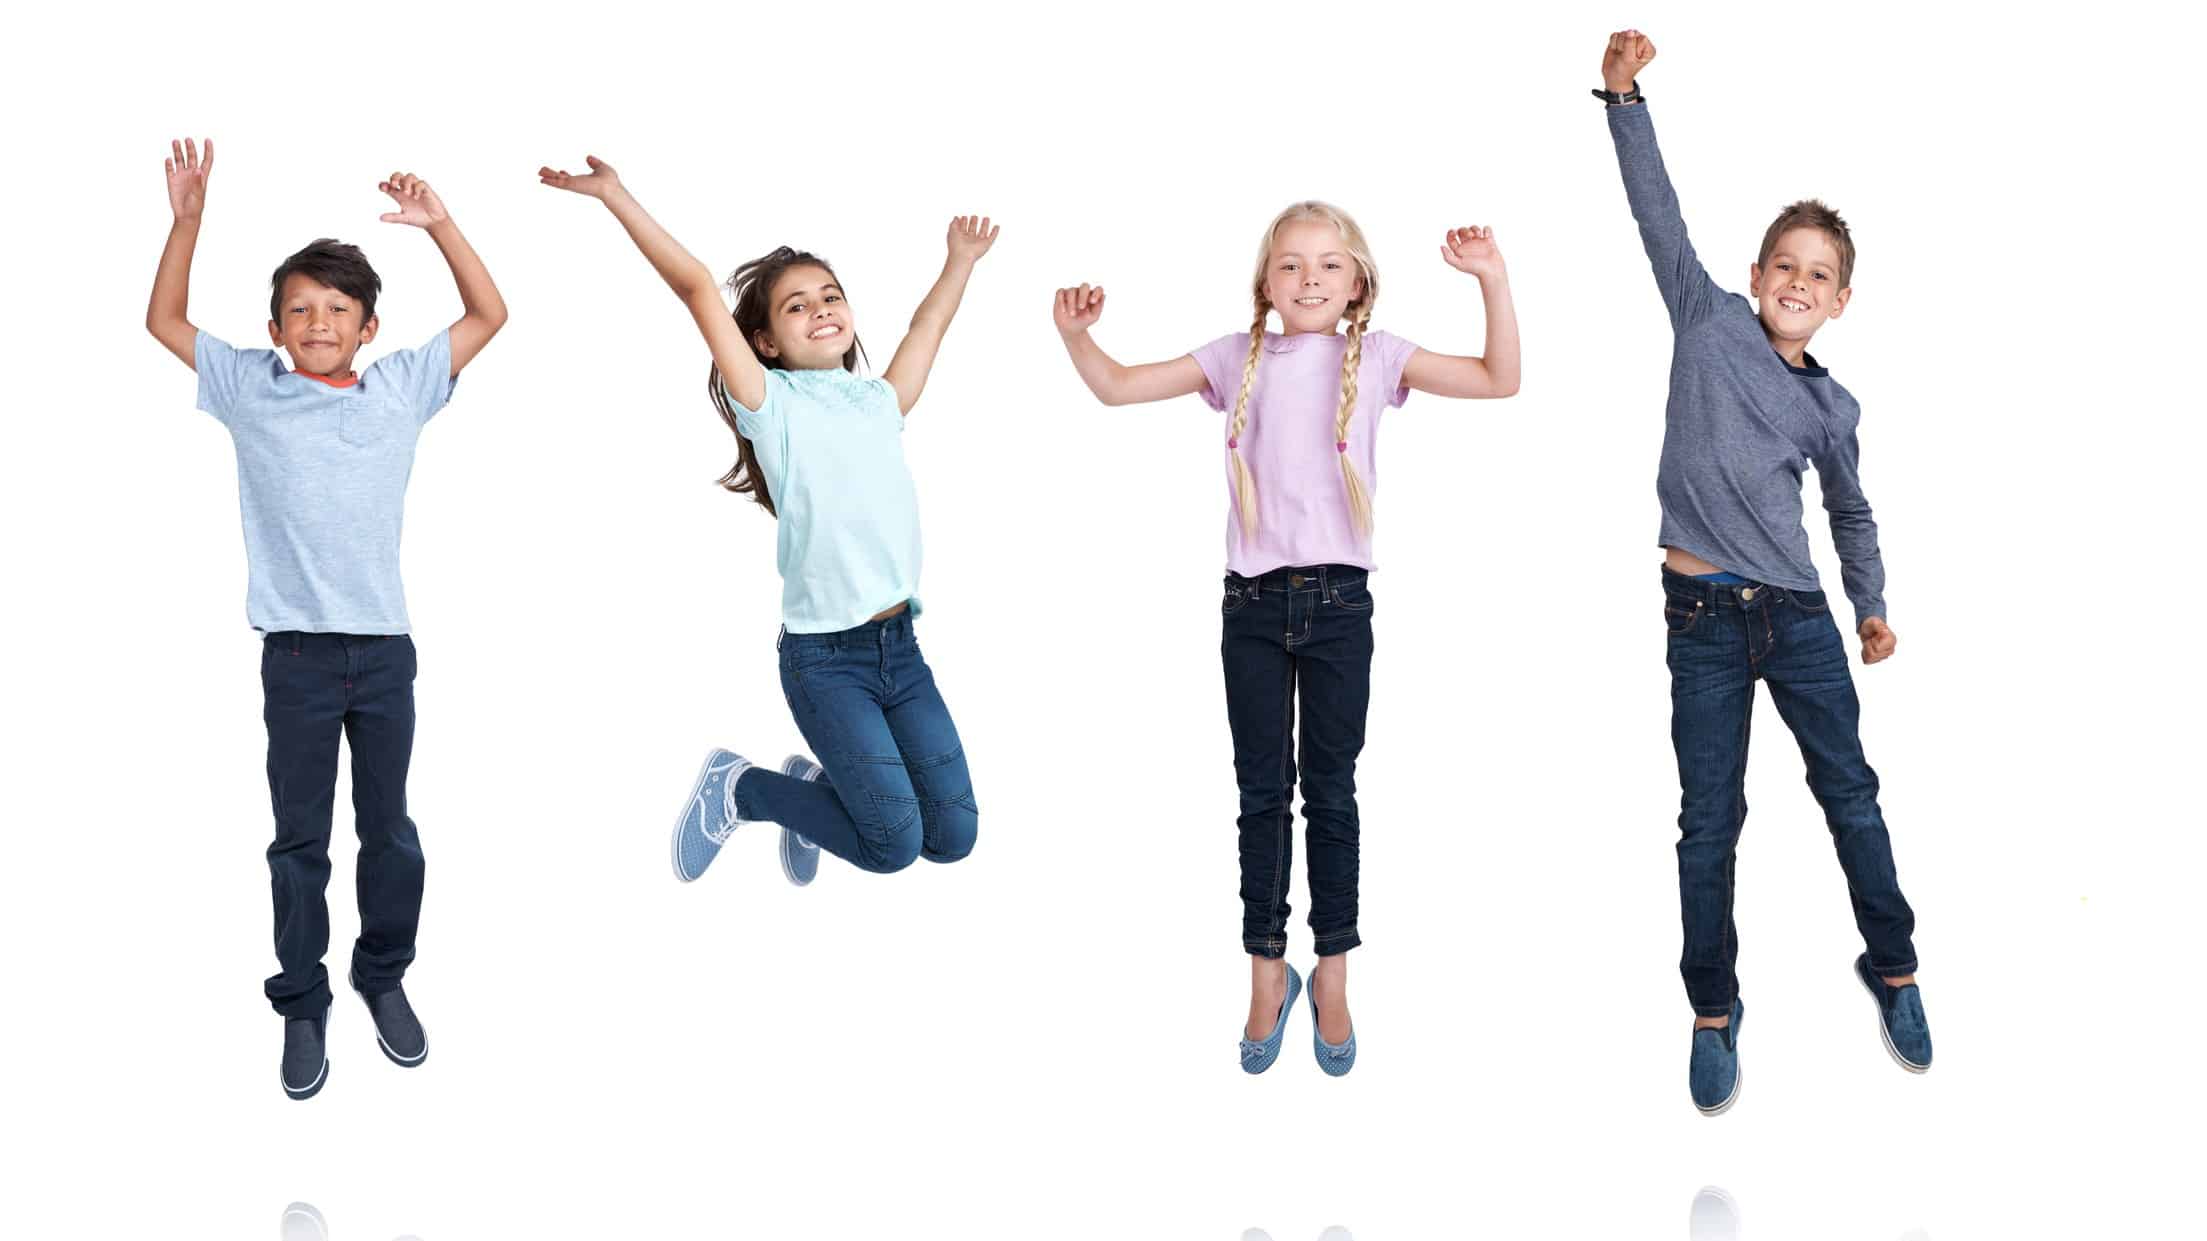 a line up of four children all leap in the air with one or two arms raised and feet off the ground.